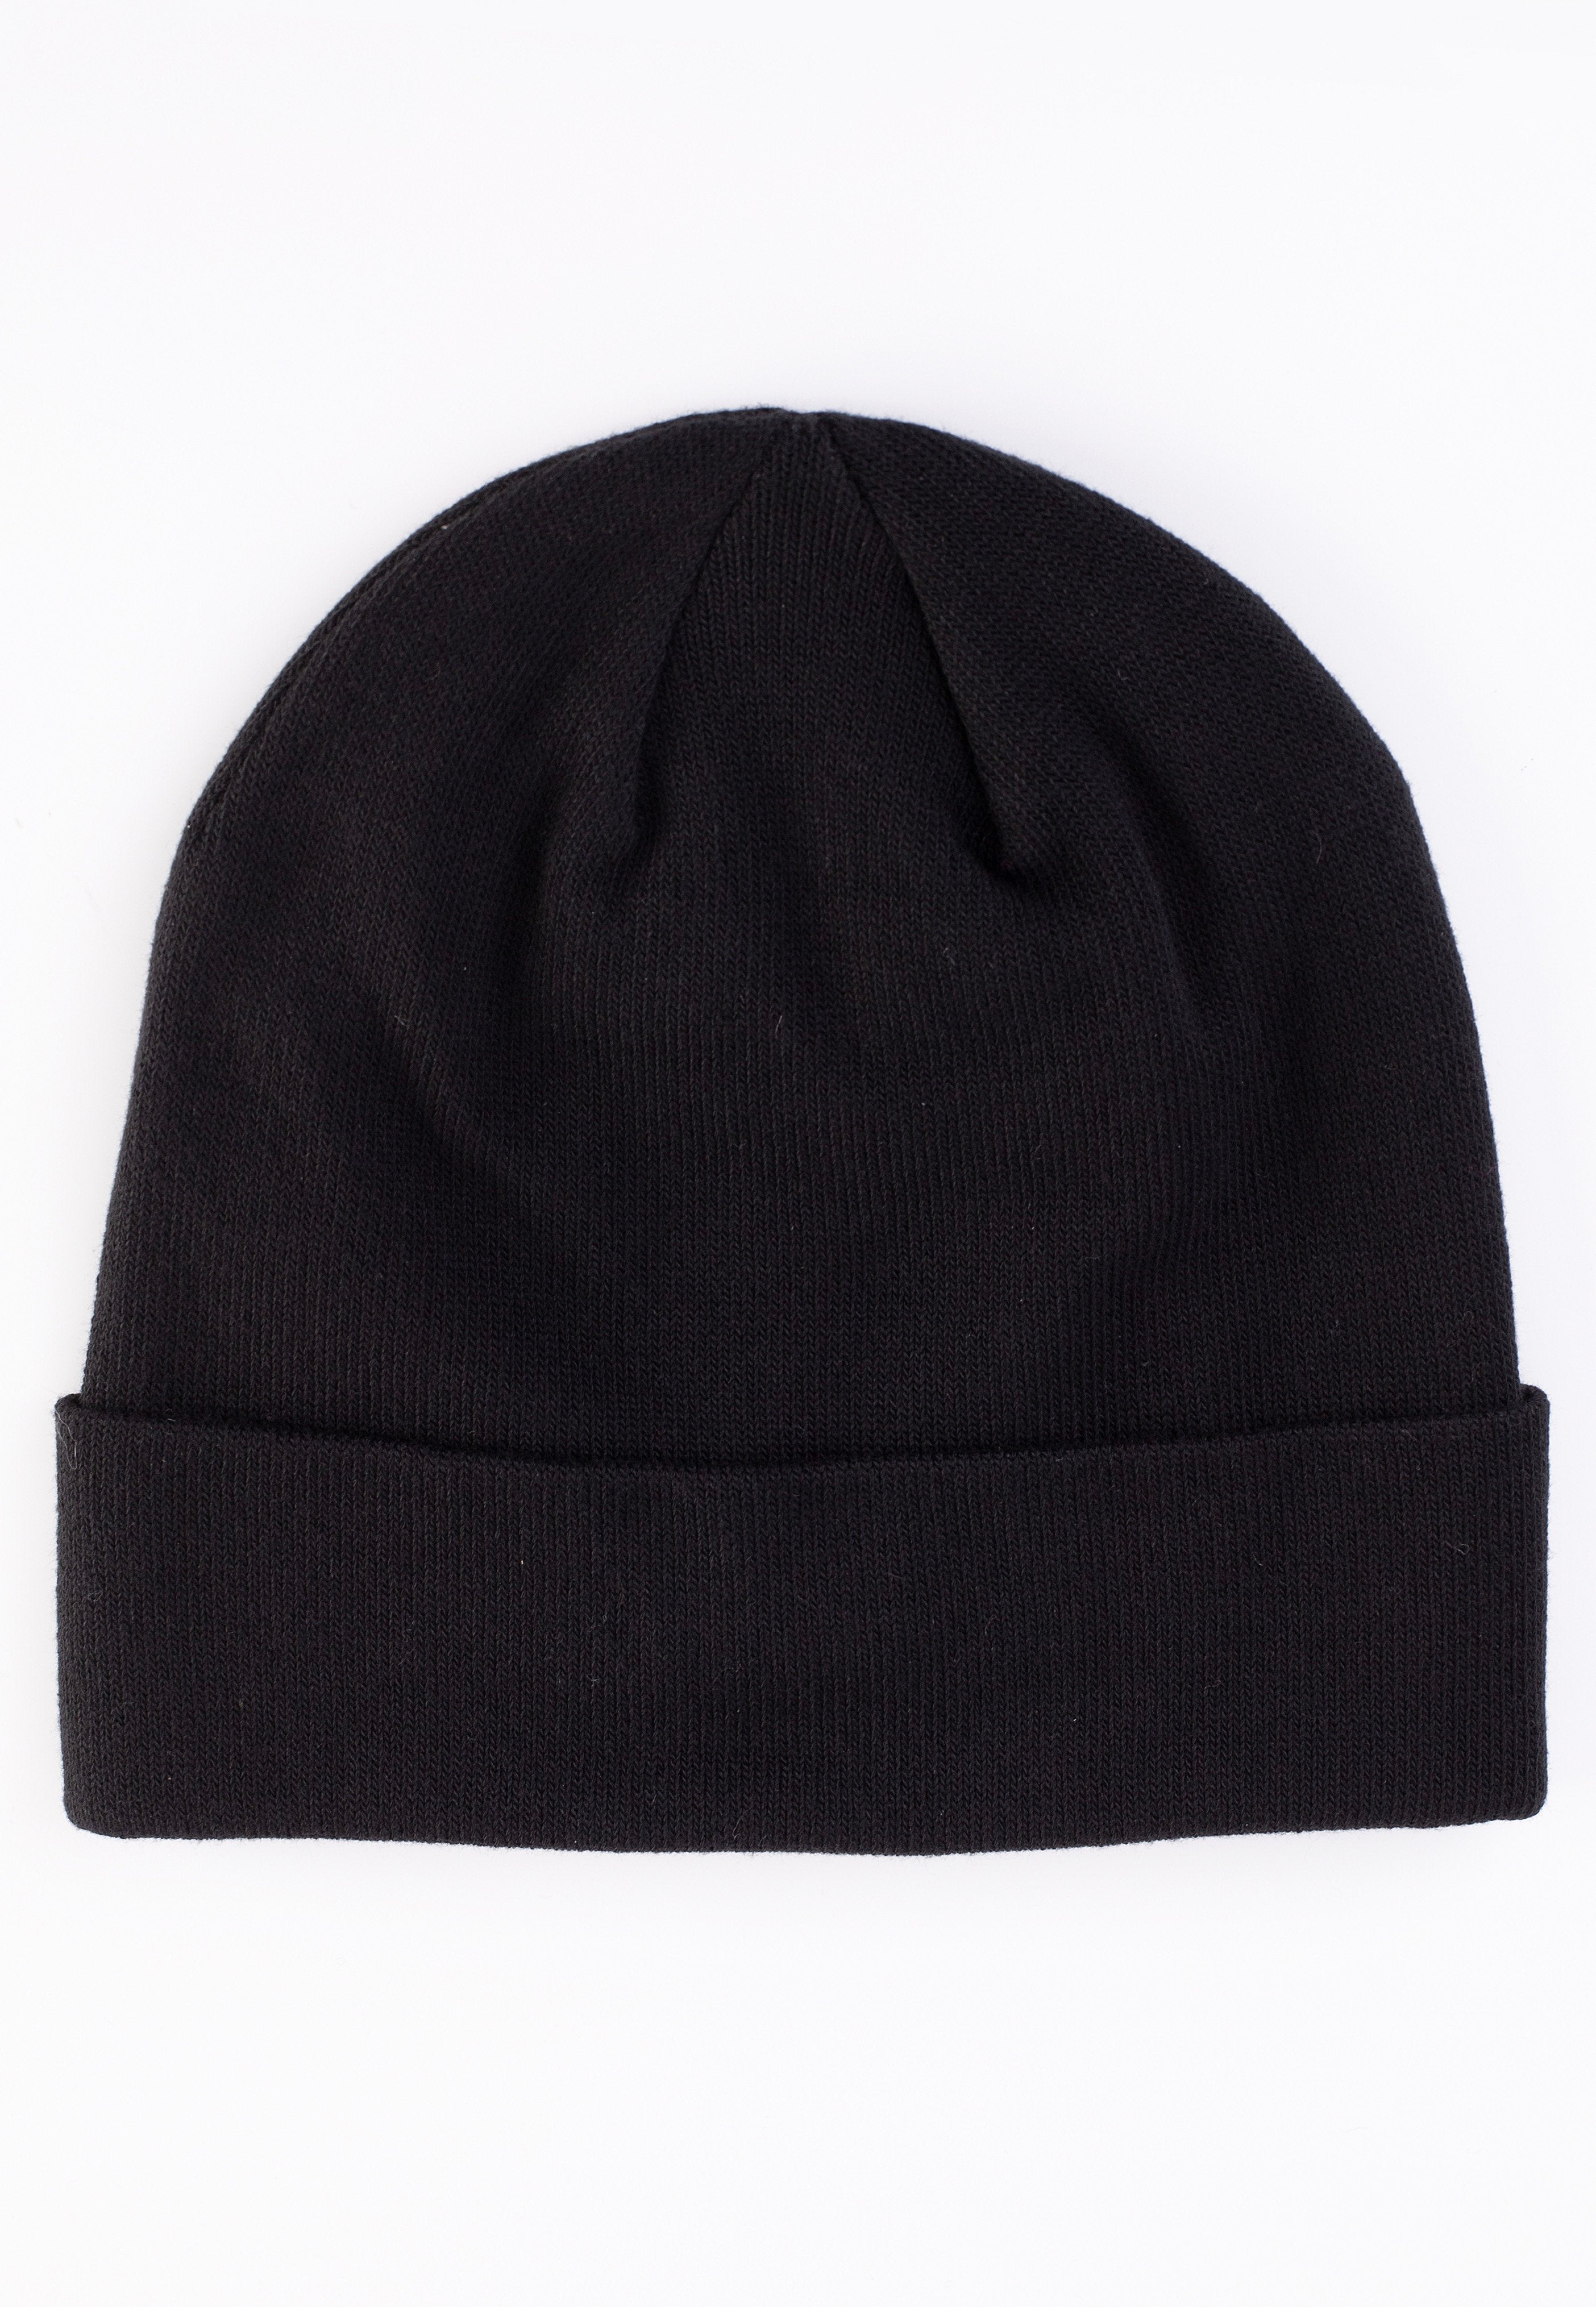 The North Face - Norm Tnf Black - Beanie